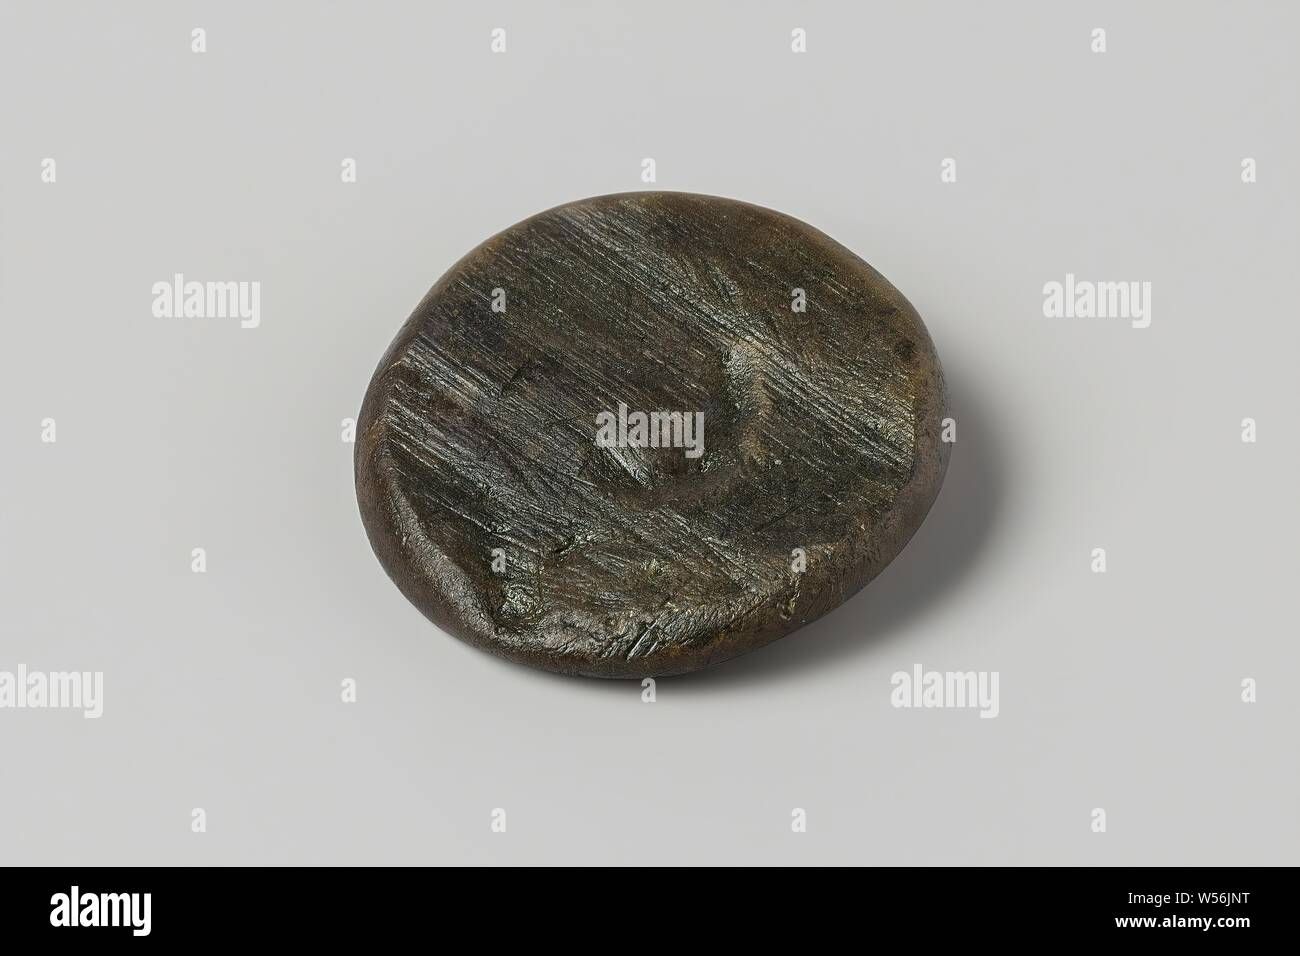 Button from the wreck of the East Indies sailor Hollandia, Knoop. (1) flat top and base, plain, ordered rim (2.6d, 0.3t), loop-shank damaged, Annet, Dutch East India Company, Hollandia (ship), anonymous, Netherlands, 1700 - in or before 13-Aug-1743, copper (metal), h 0.4 cm × d 2.6 cm Stock Photo